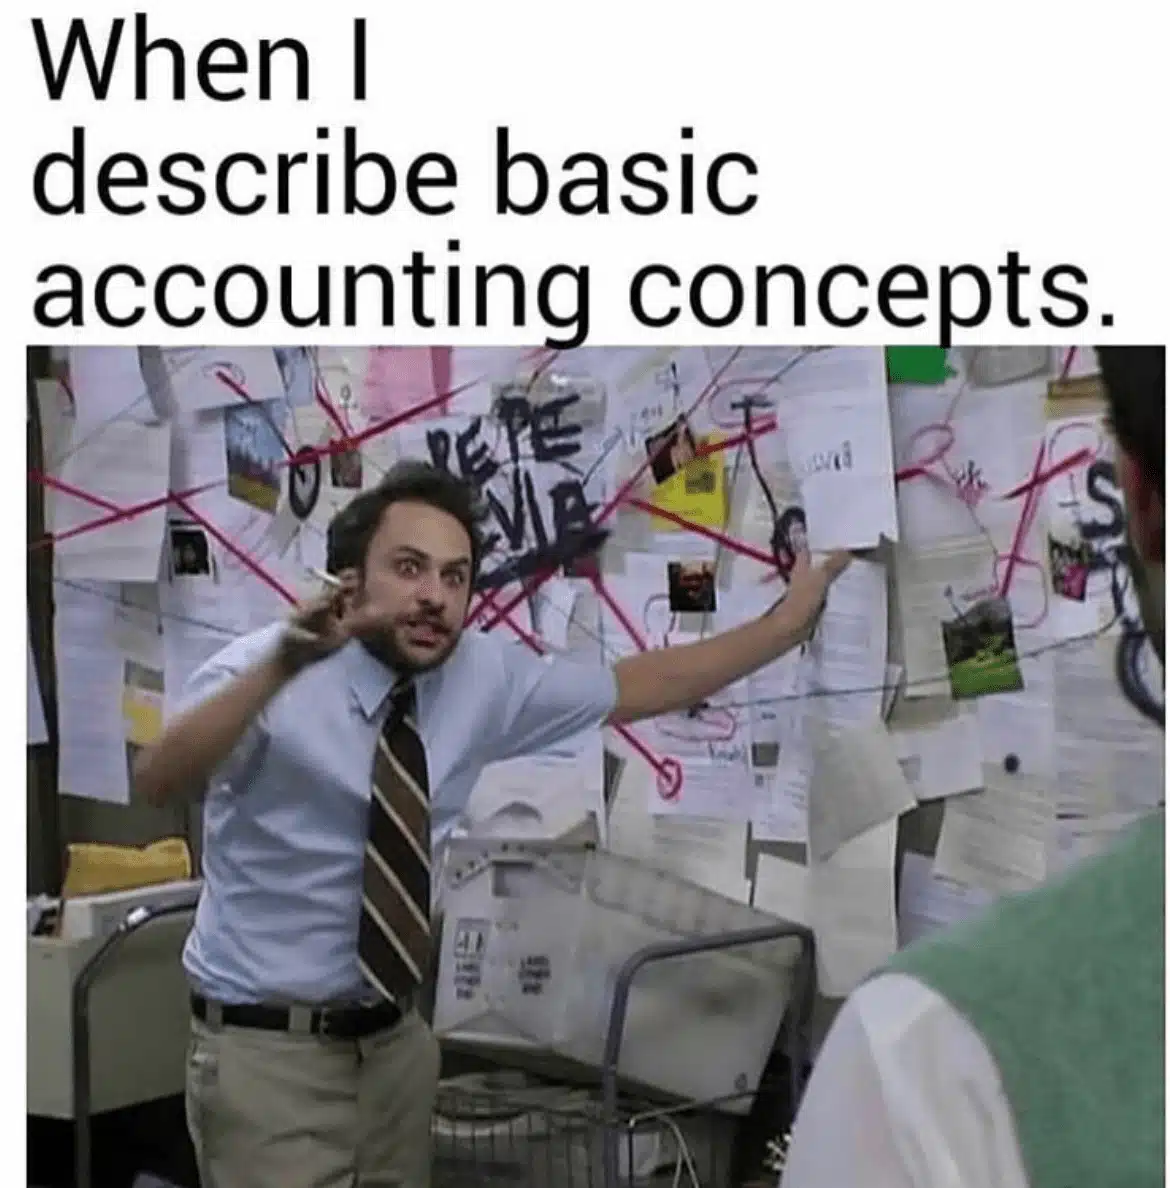 funny accounting meme - trying to describe basic accounting concepts